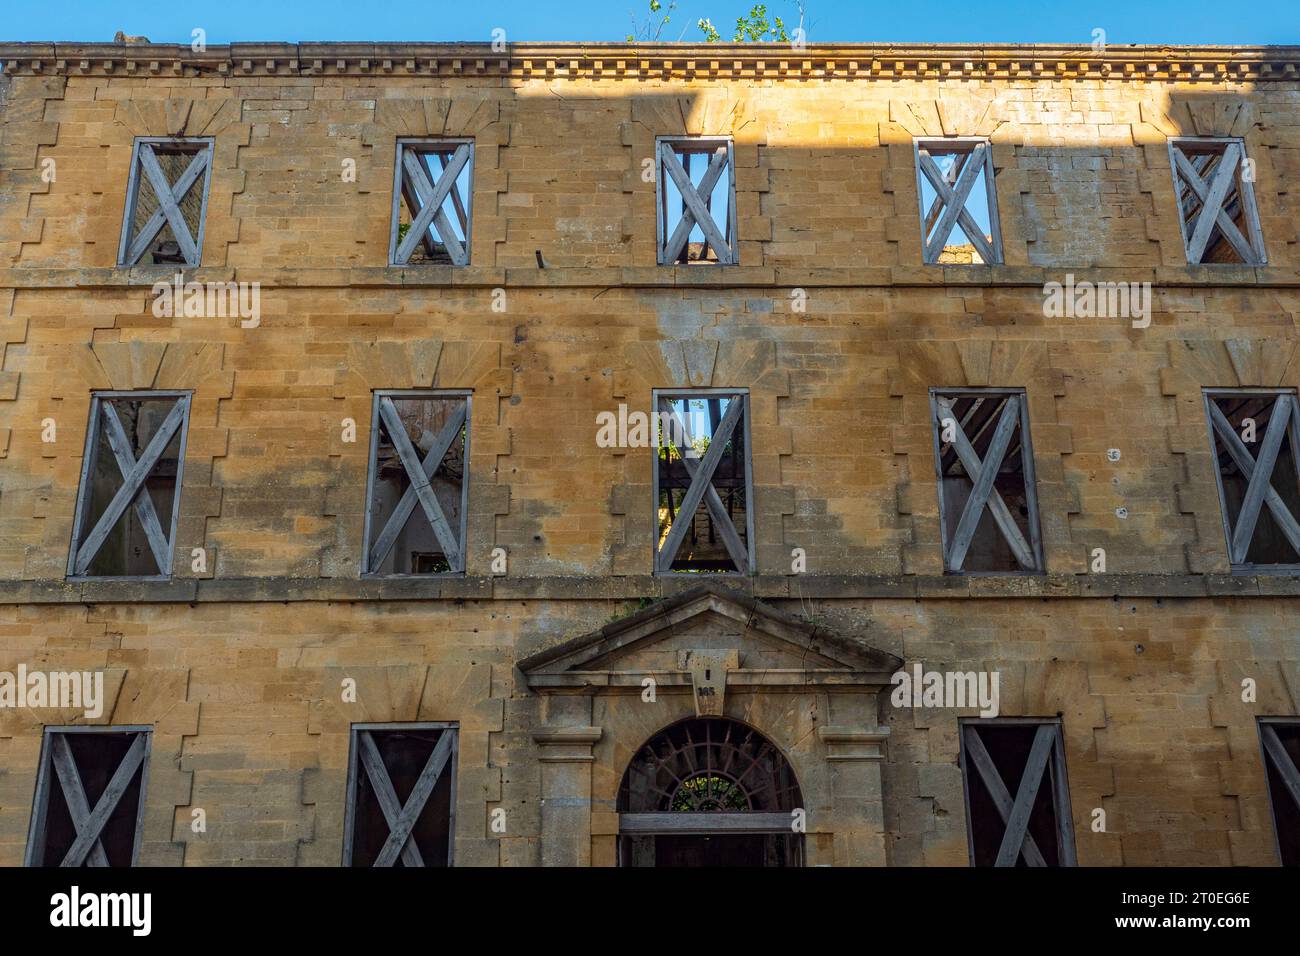 Old buildings in the citadel of Montmedy, Departement Meuse, Region Grand Est, France Stock Photo